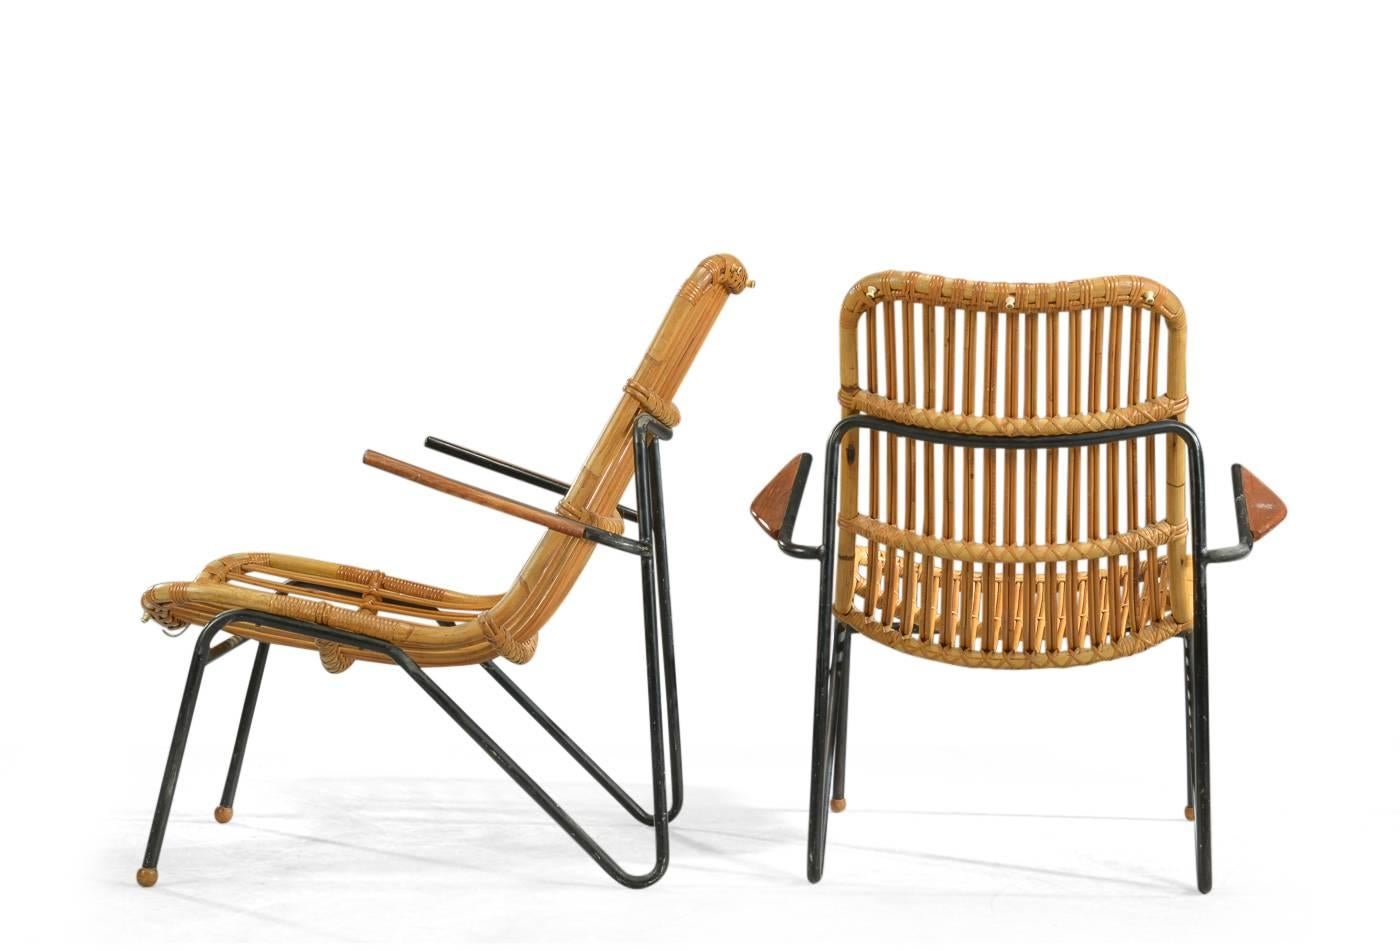 Laurids Lønborg. Pair of chairs with bamboo seat on a metal frame painted black, with teak armrests. Label Laurids Lønborg Copenhagen. Presence of wear marks.